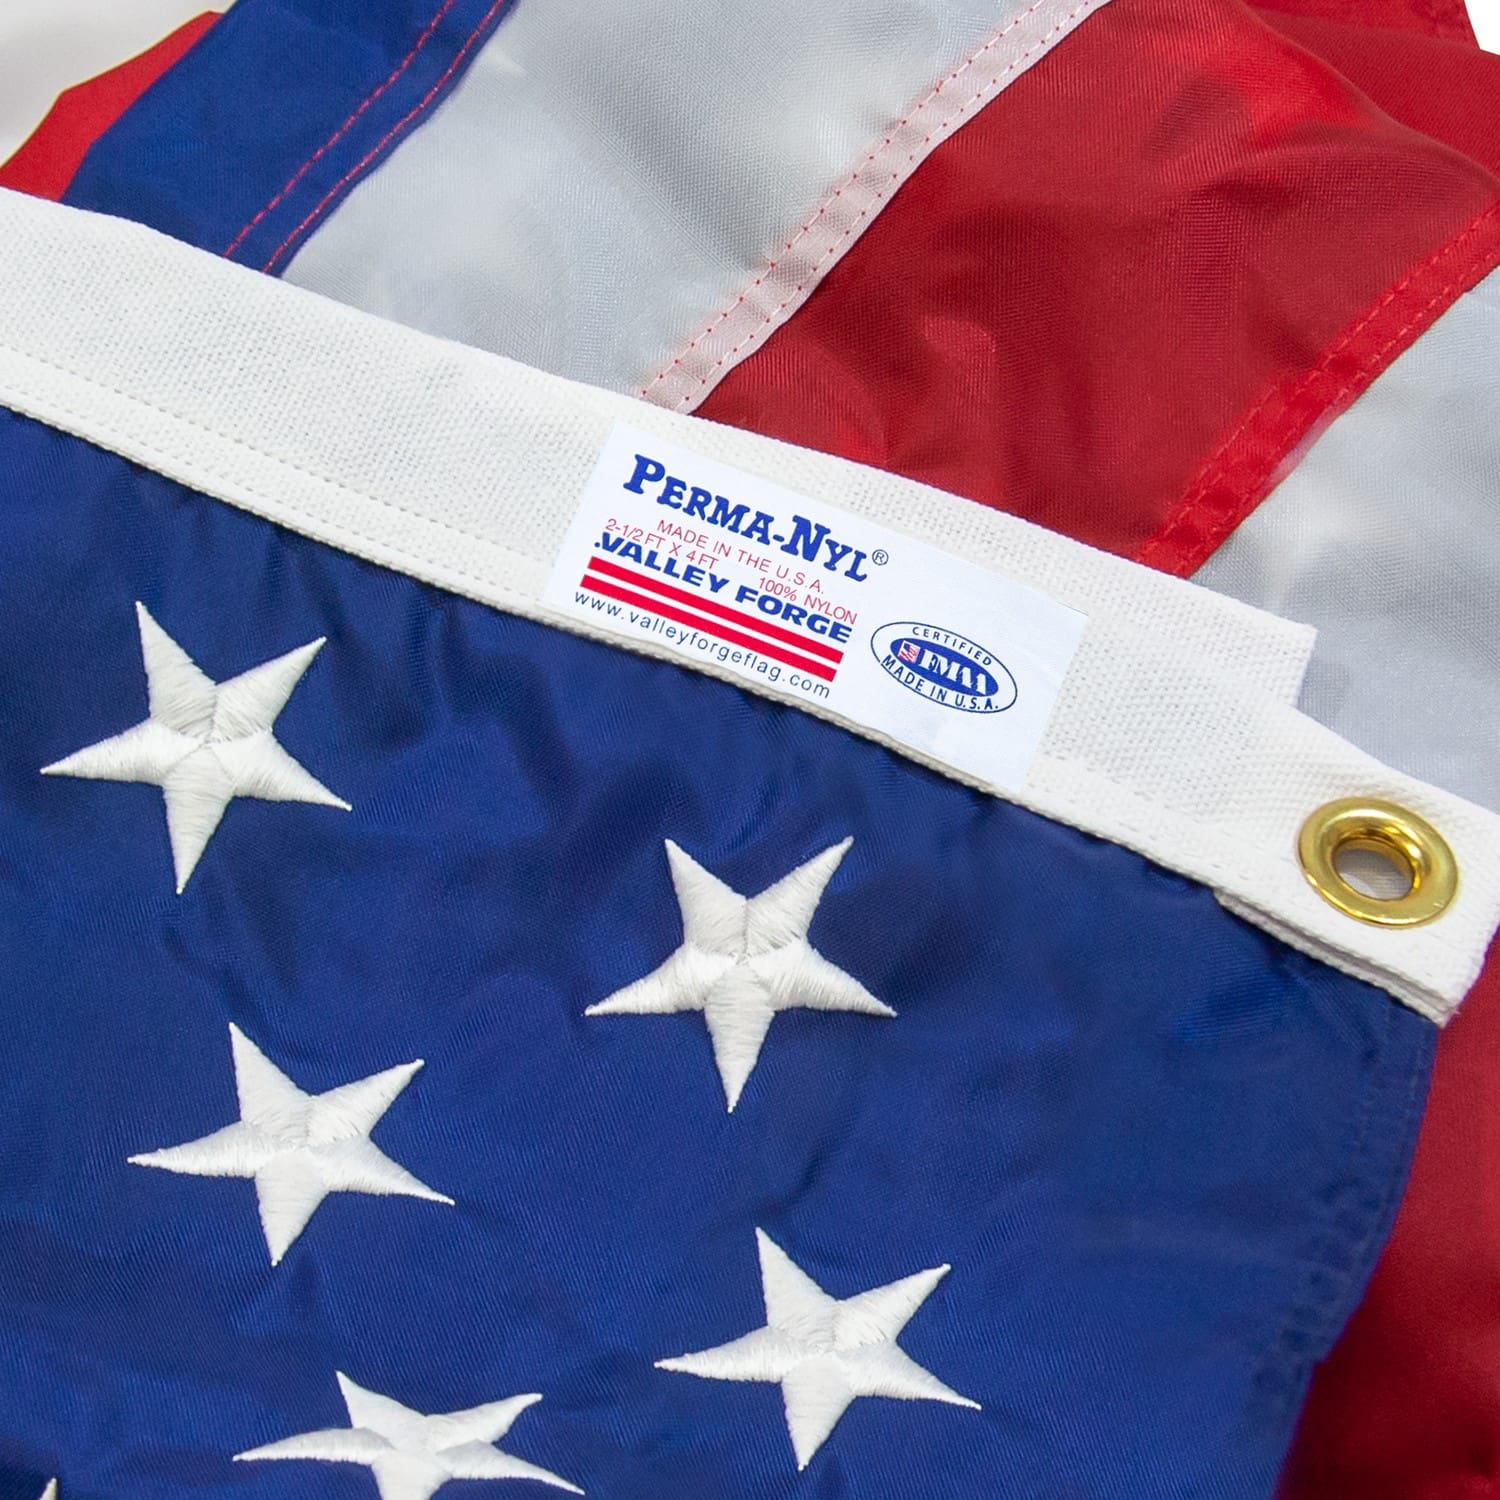 American made flags in 100% Nylon by Valley Forge